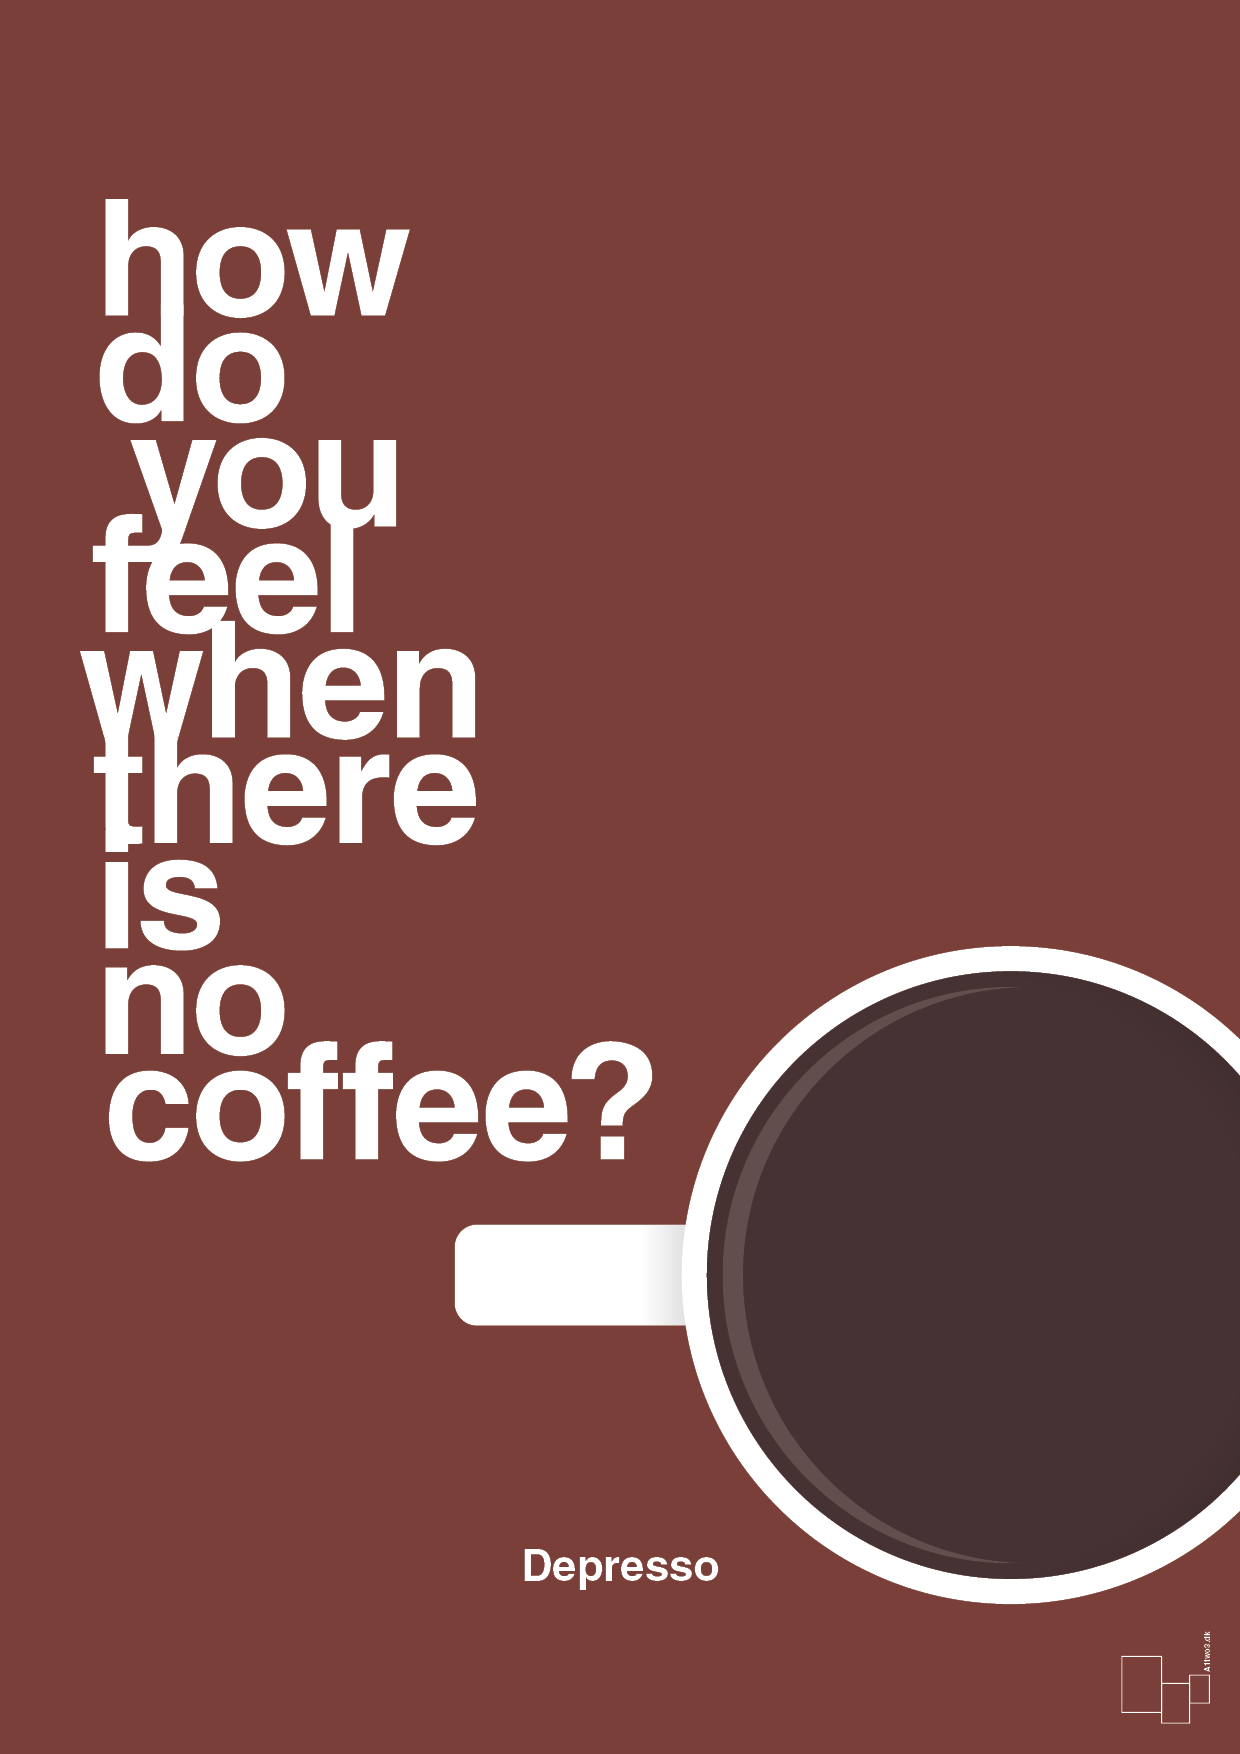 how do you feel when there is no coffee? depresso - Plakat med Mad & Drikke i Red Pepper